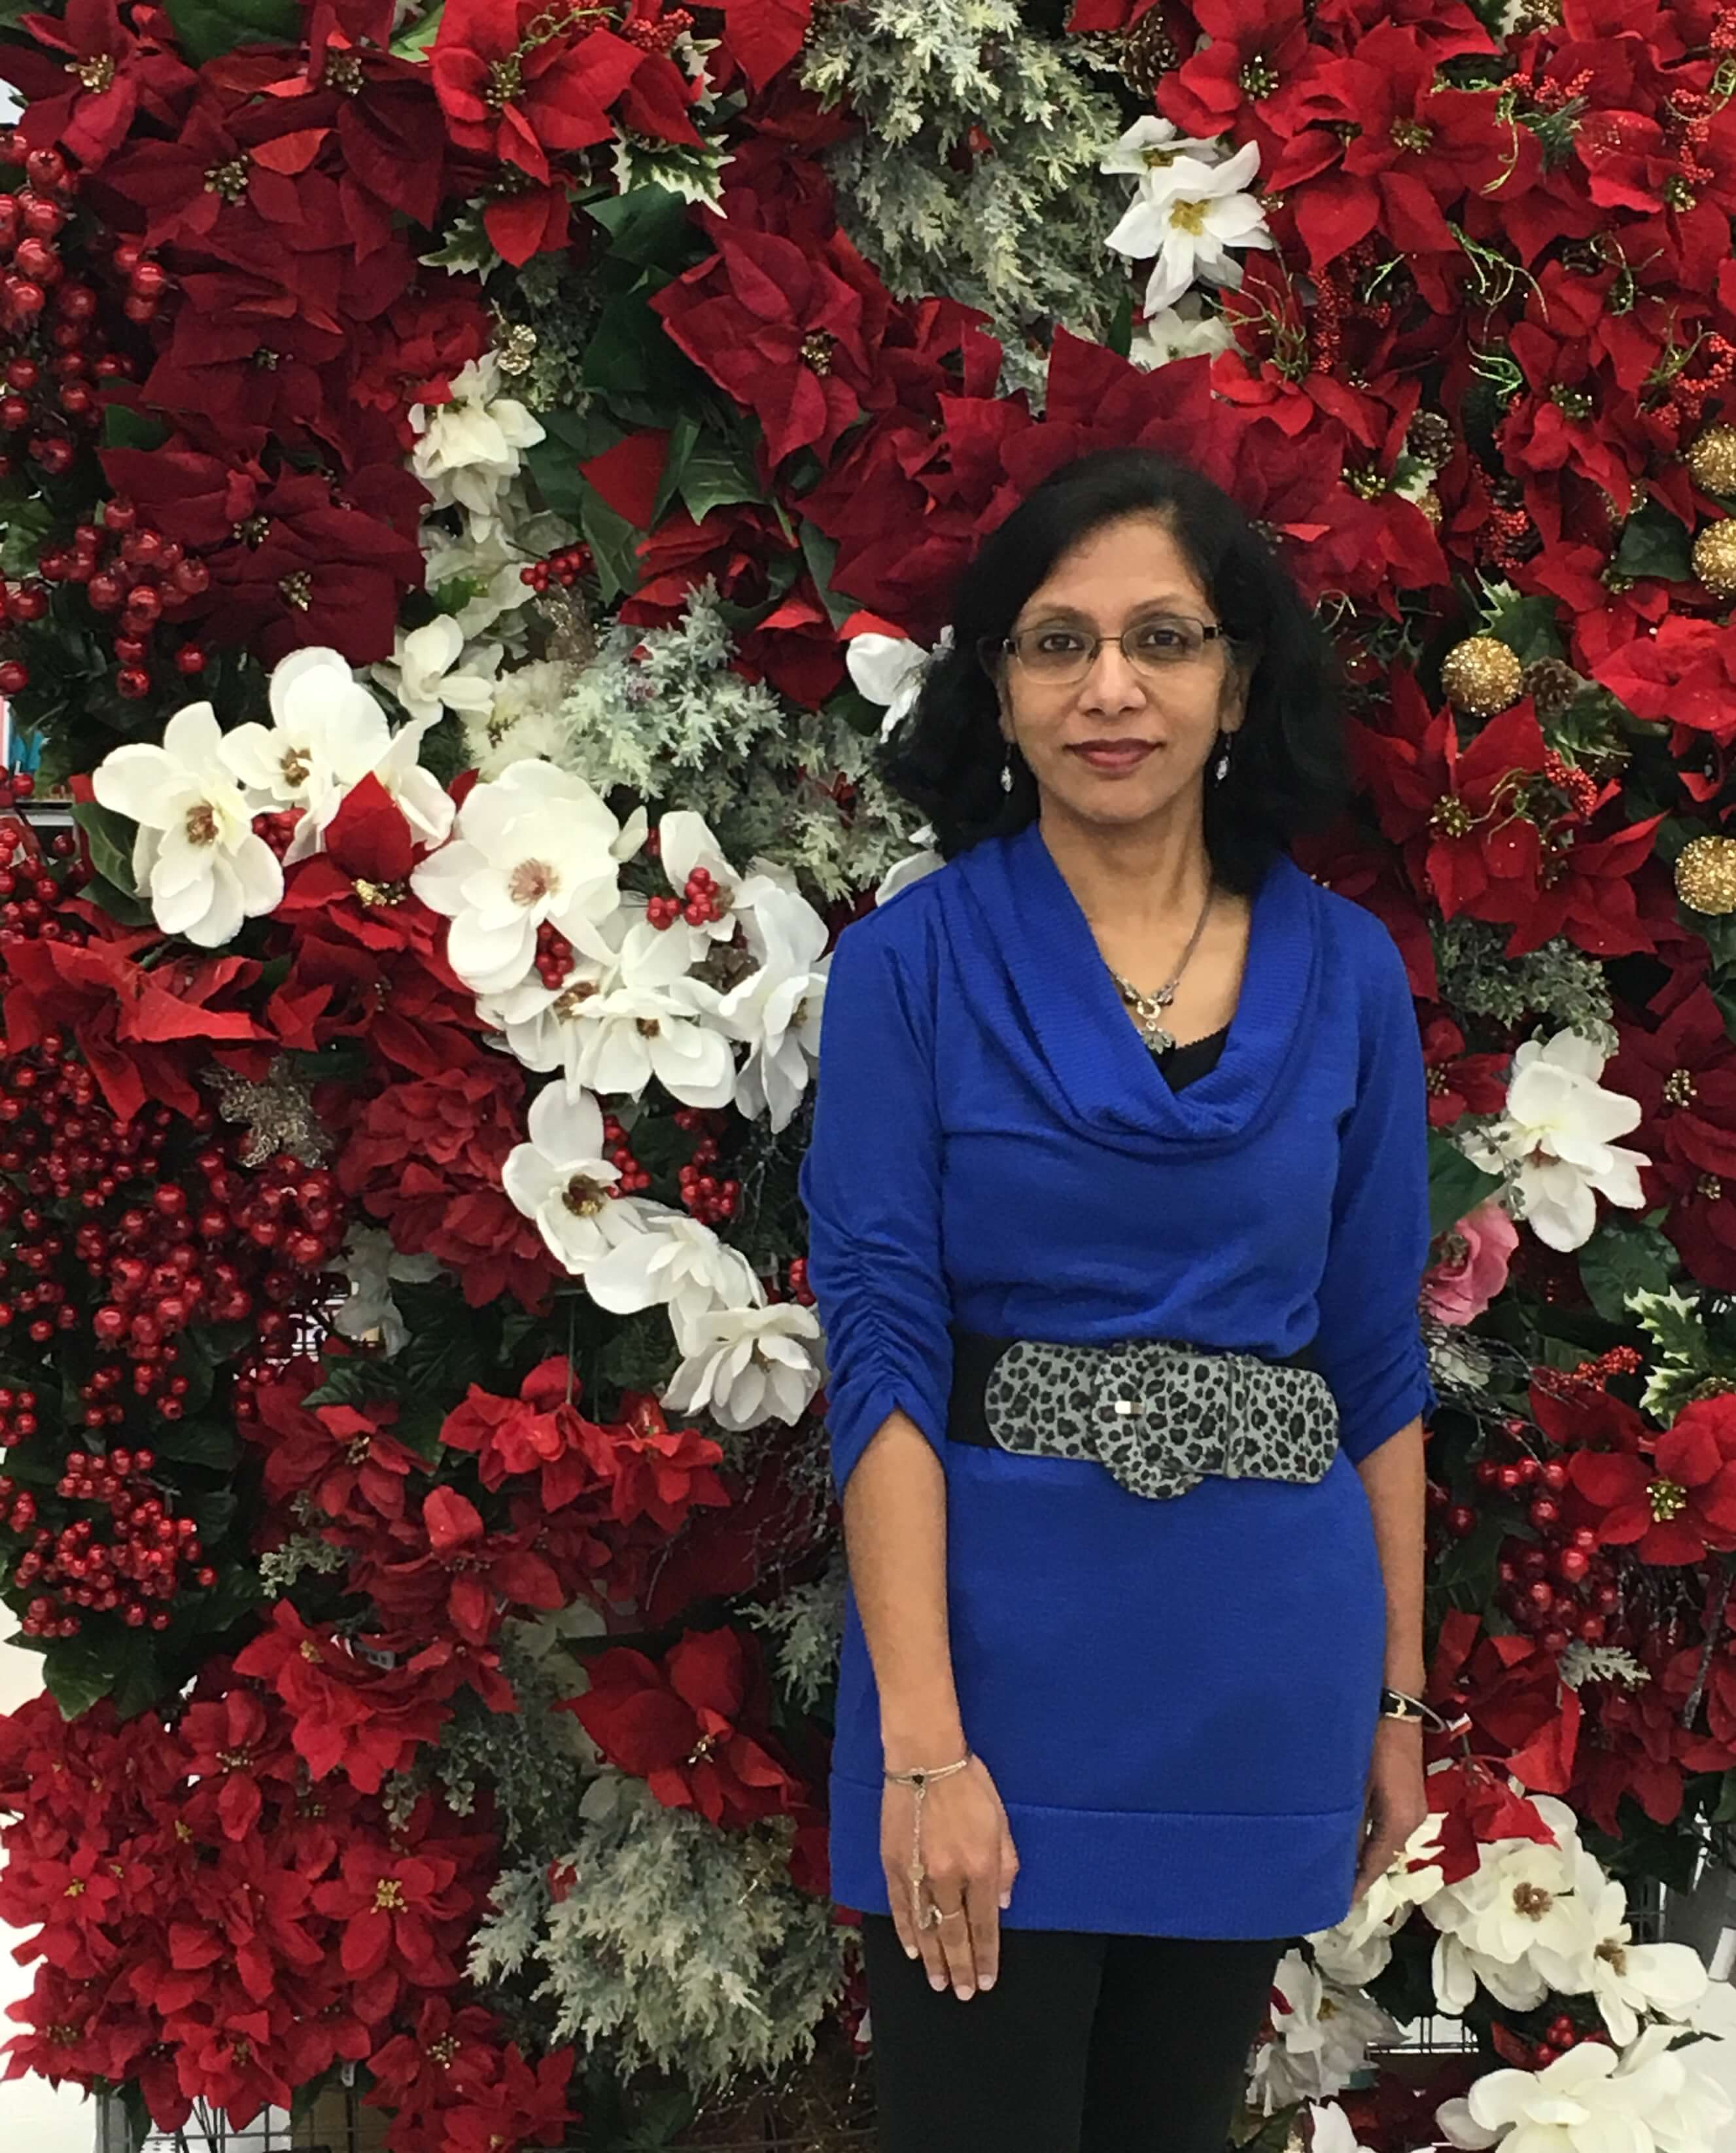 Photograph of Sumita Bose surrounded by flowers.